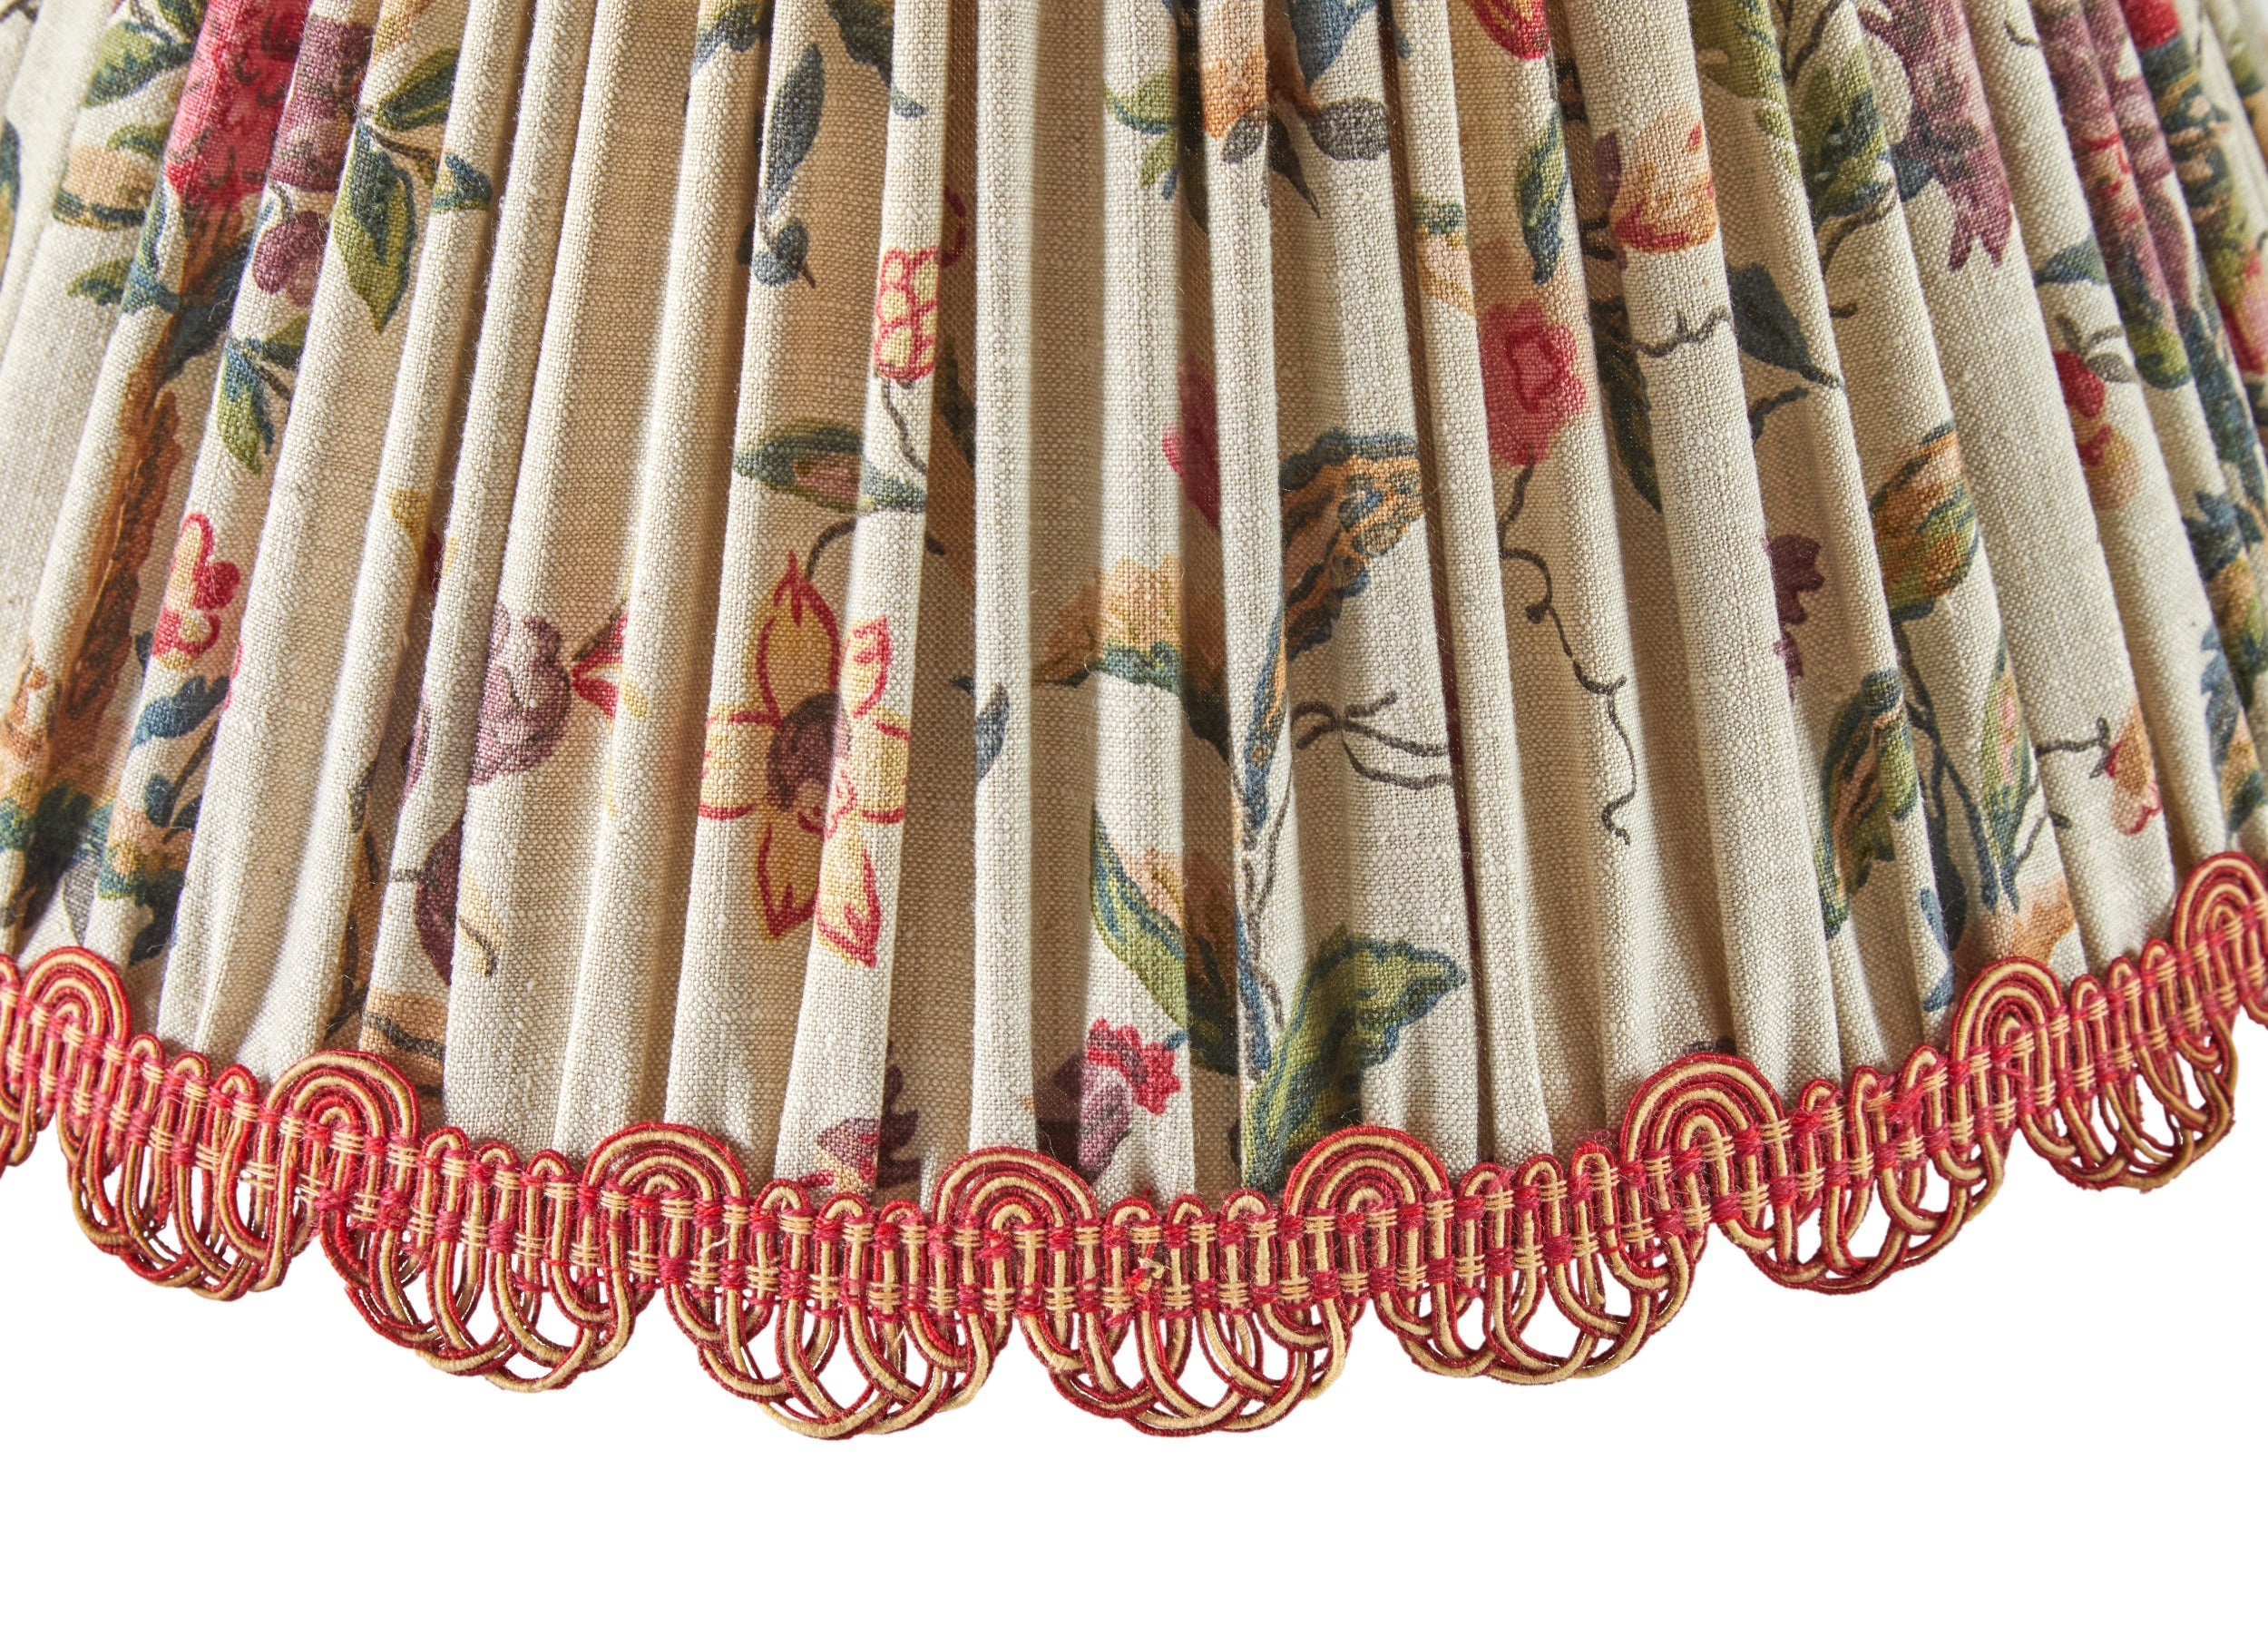 A Gathered Lampshade made from 1920s Floral Printed Linen with French Loop Braid